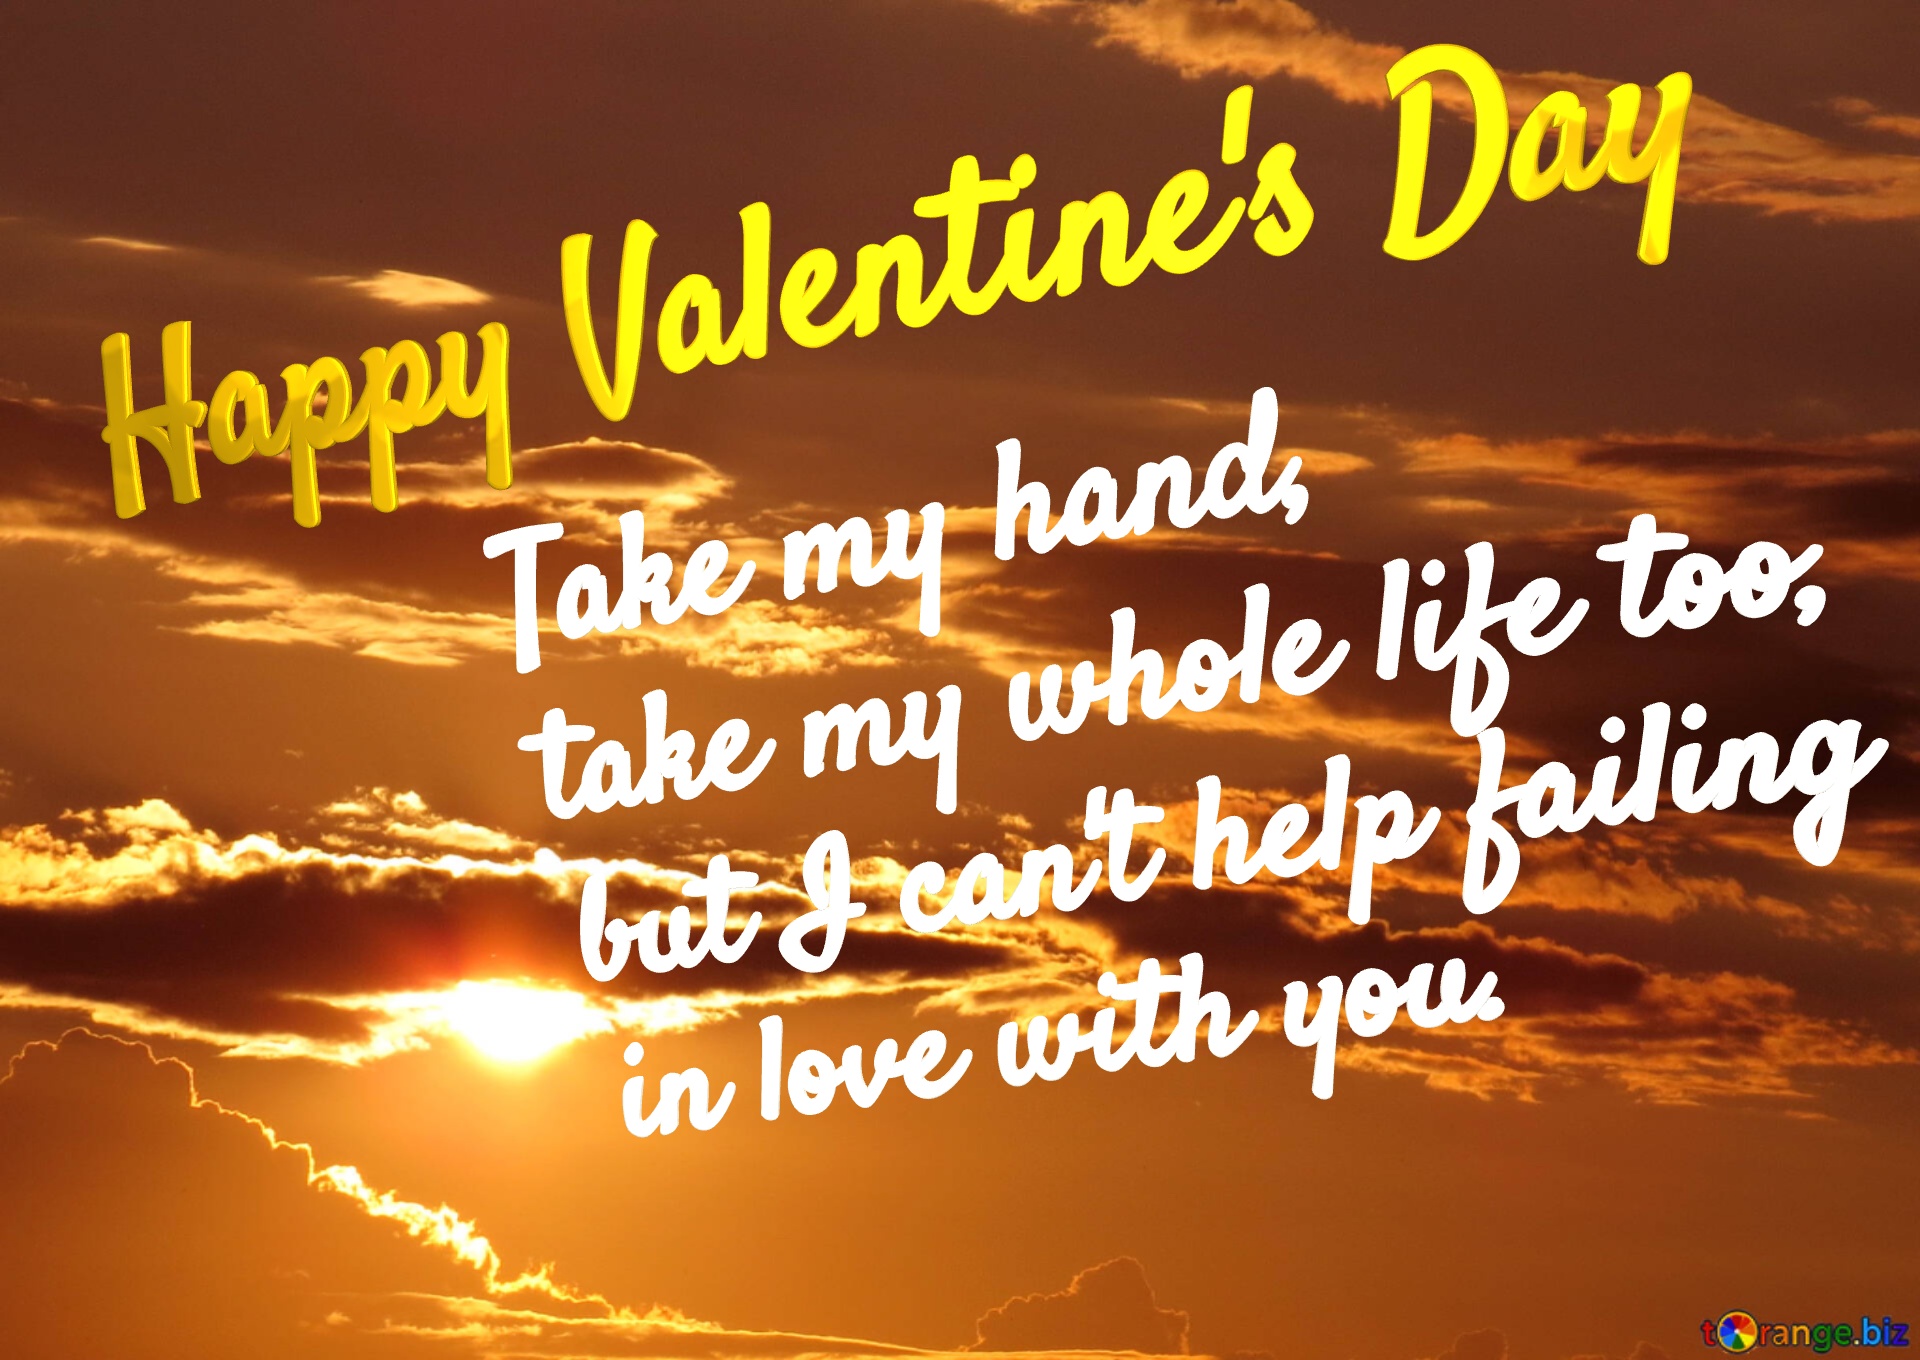 Happy Valentine`s Day Take my hand,  take my whole life too,  but I can`t help failing  in love with you. Golden sky №36391